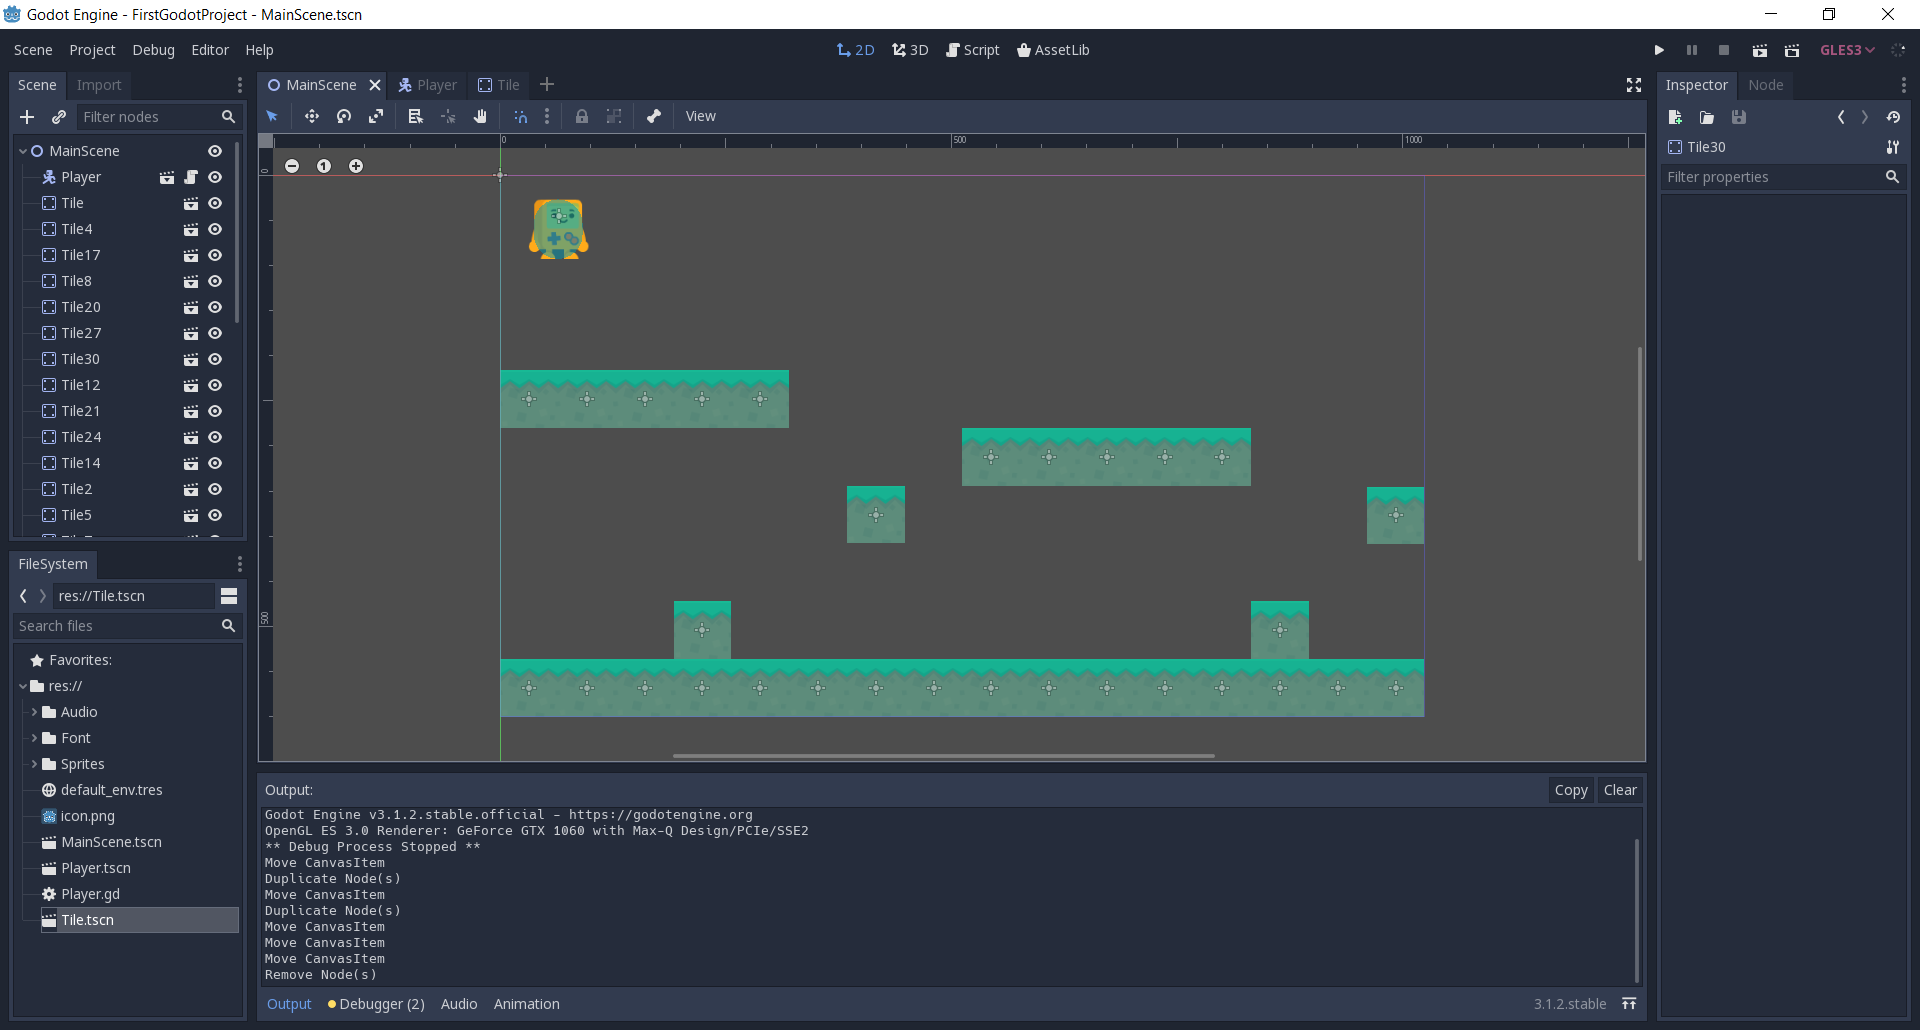 Godot with a basic 2D platformer level created with tiles